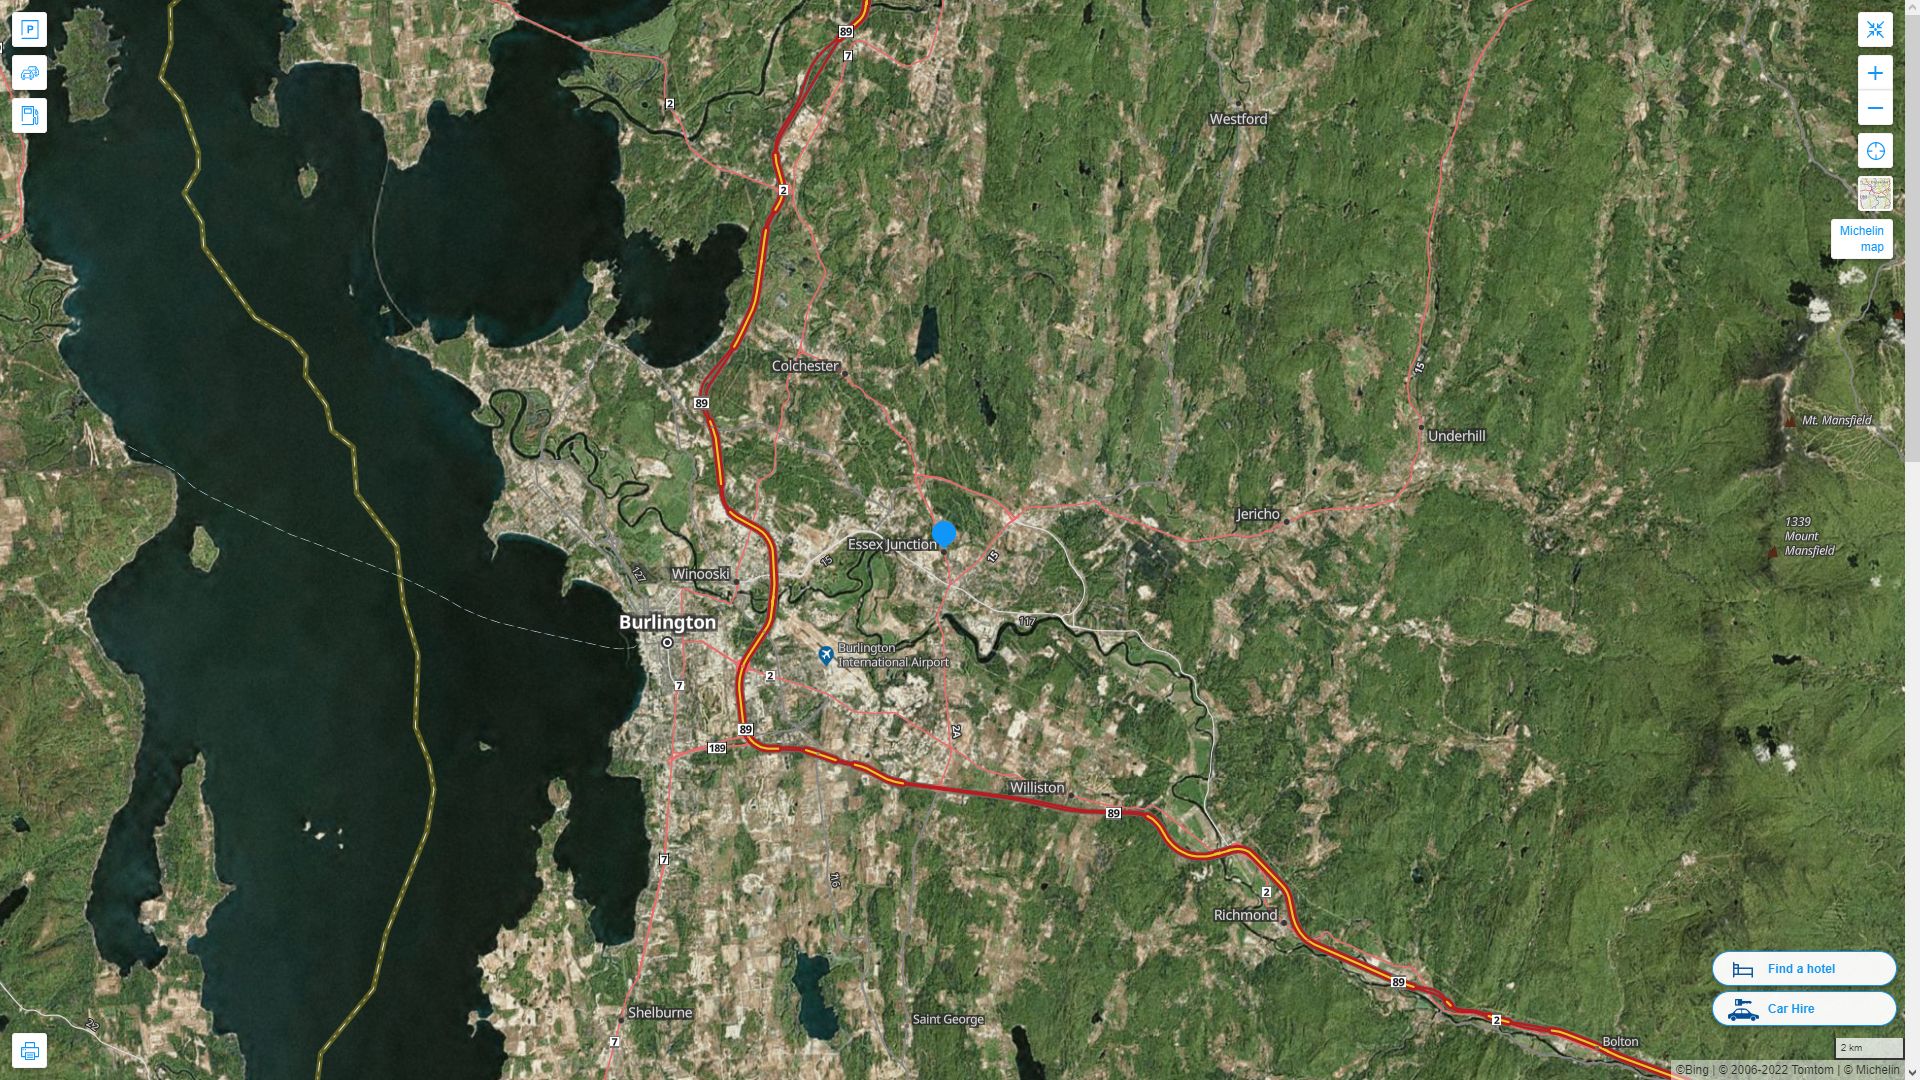 Essex Junction Vermont Highway and Road Map with Satellite View